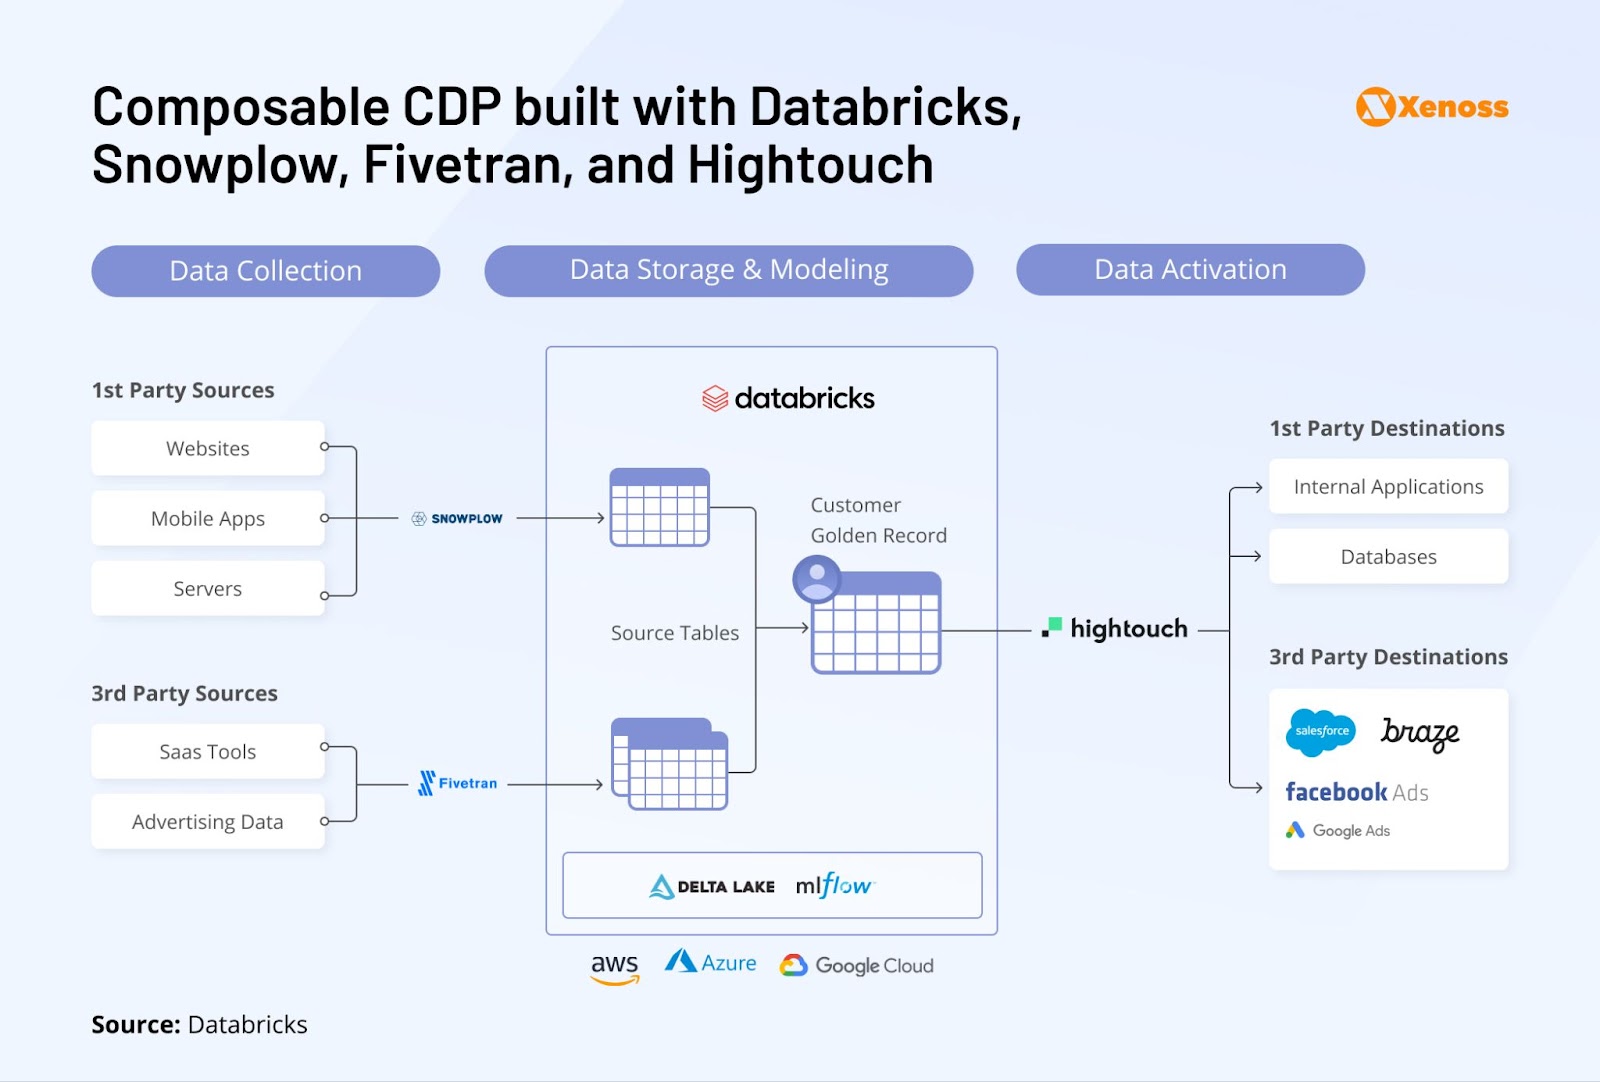  Example of composable CDP architecture with Databricks, Snowplow,  Fivetran, and Hightouch | Xenoss Blog